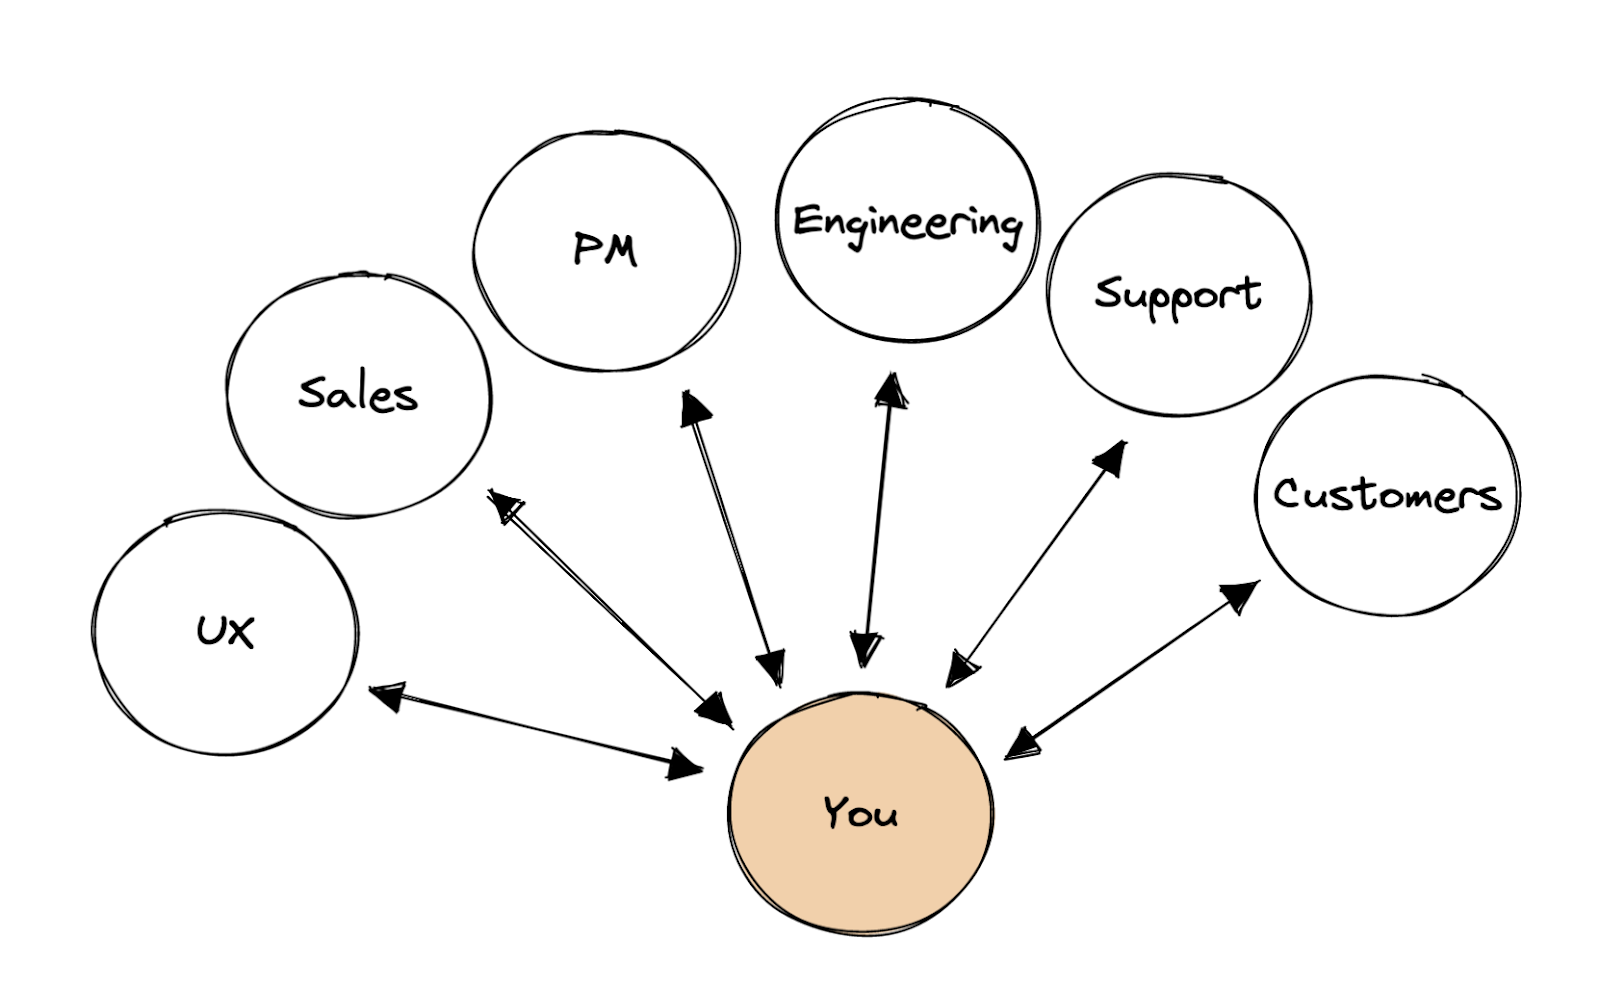 Diagram showing a circle with “You” in it with double ended arrows pointing to circles representing other teams at your organization: UX, Sales, PM, Engineering, Support, and Customers 